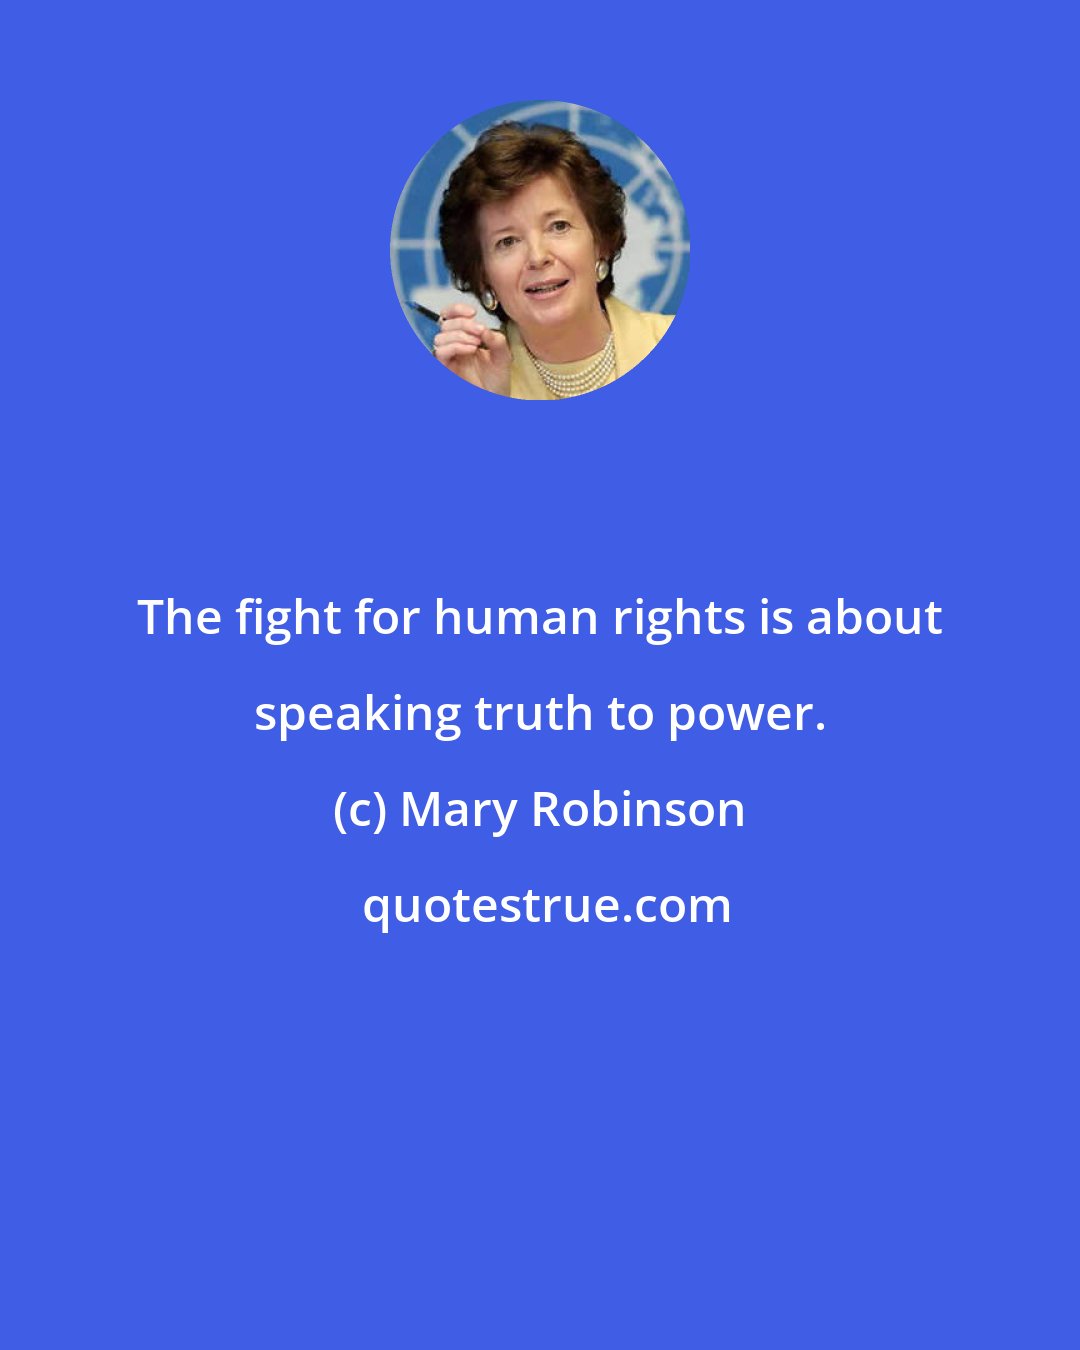 Mary Robinson: The fight for human rights is about speaking truth to power.